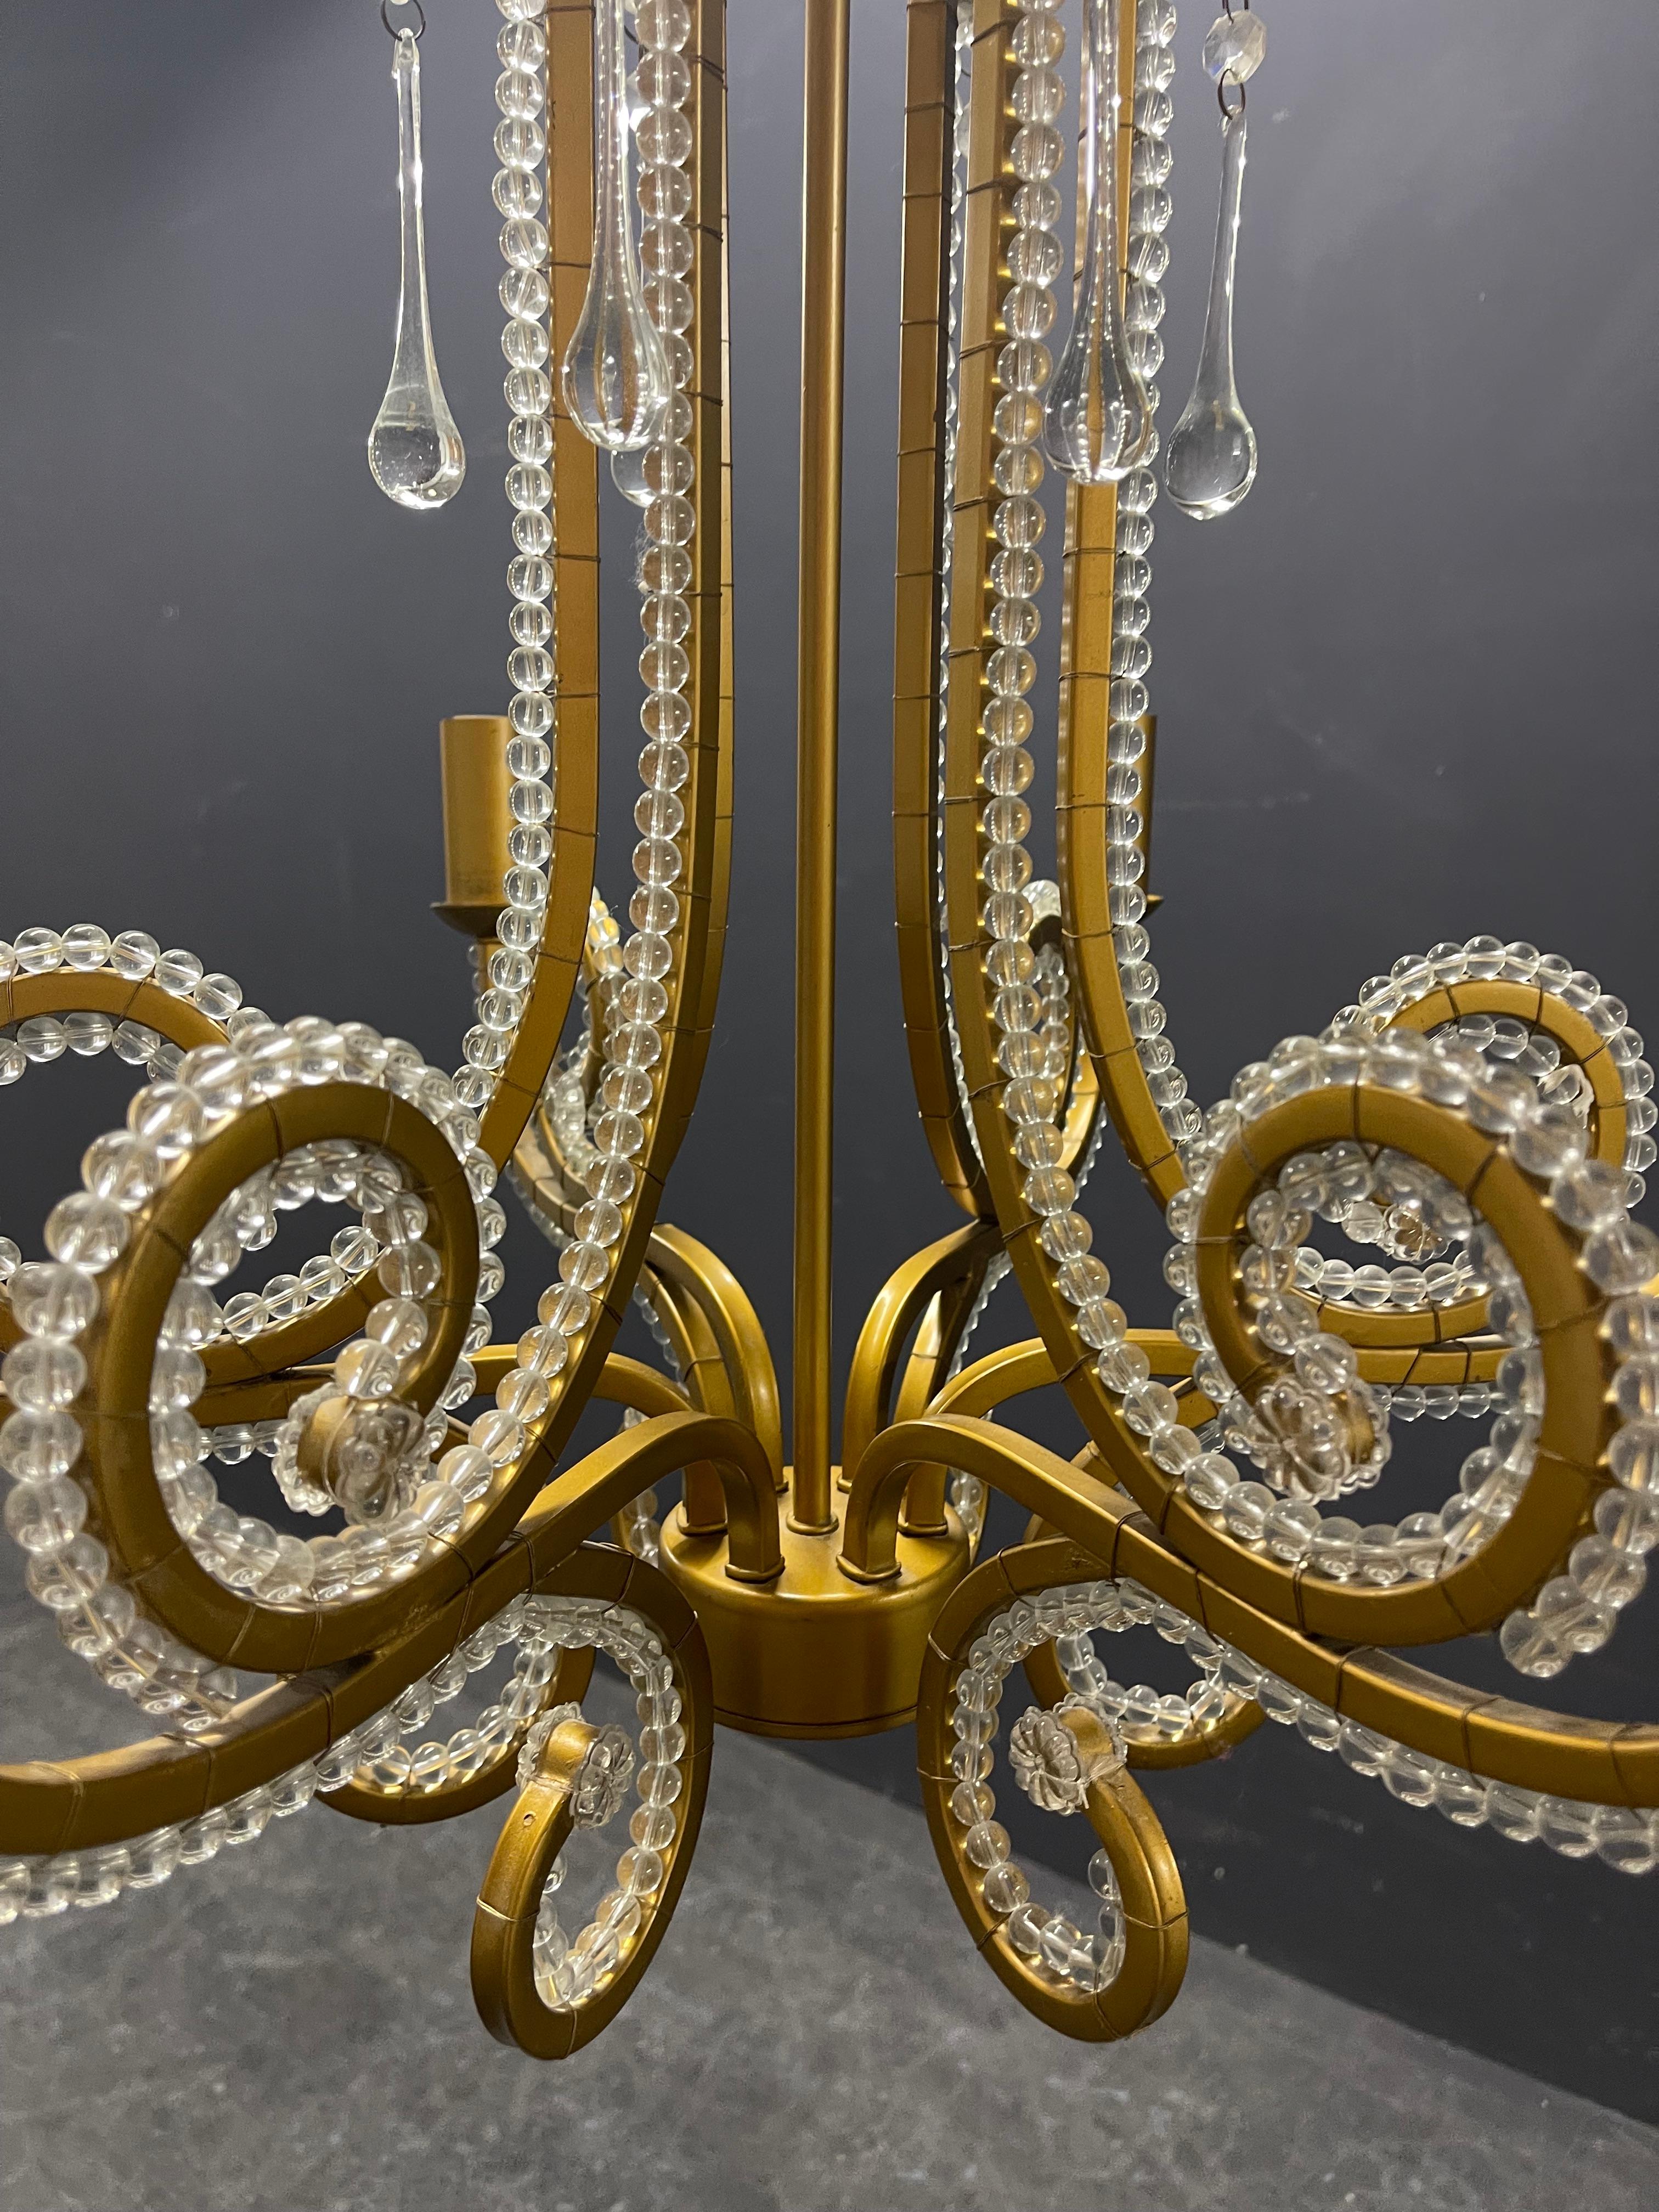 Metal amazing glass and metal chandelier For Sale